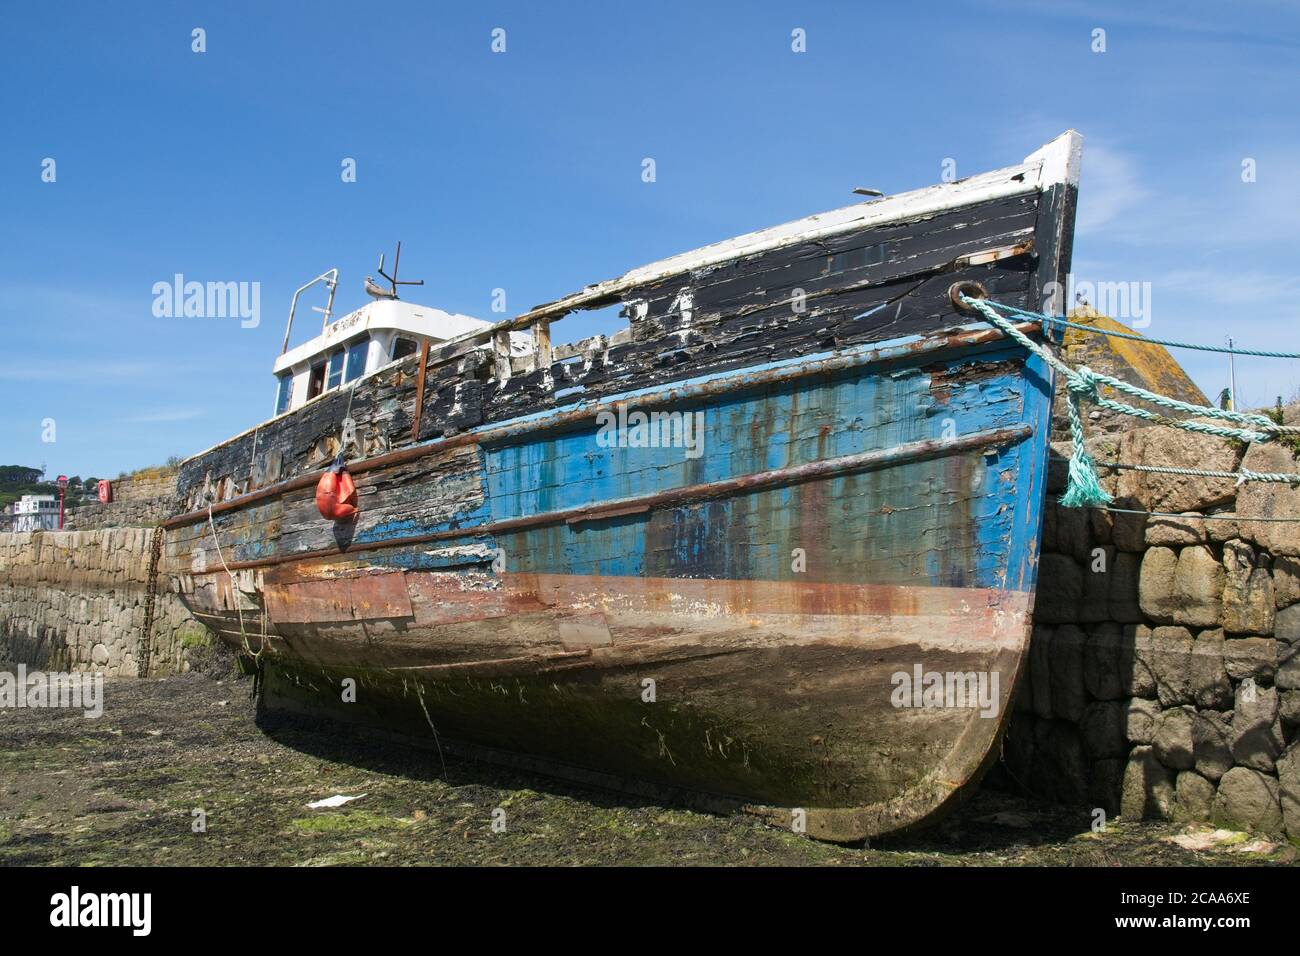 Derelict trawler beyond repair and decaying lying alongside outer wall of Old Harbour Newlyn Flaking paintwork, rotting timber hull. Landscape format Stock Photo